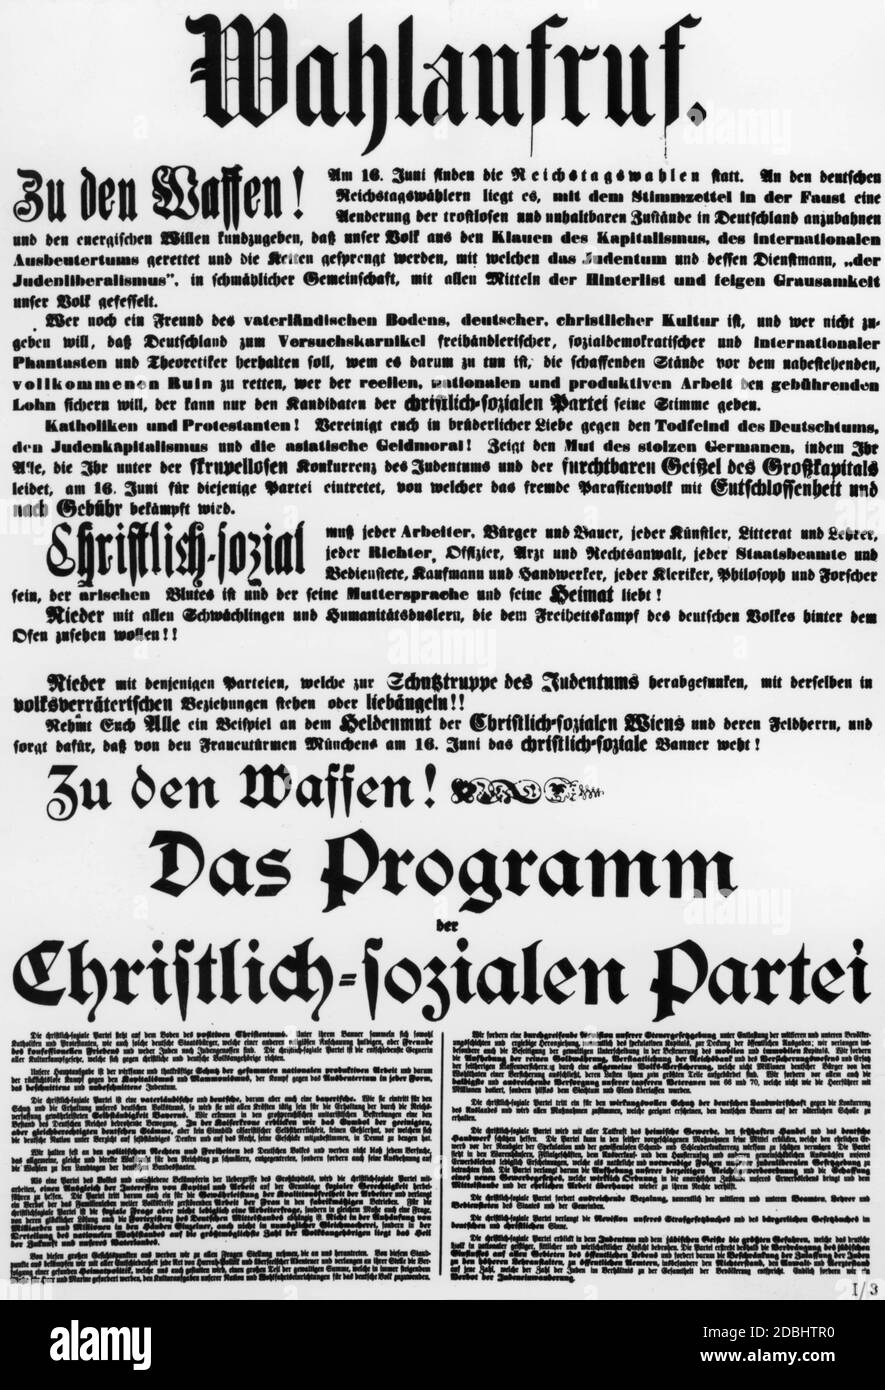 'An election appeal by the anti-Semitic Christian Social Party, which culminated in the German National People's Party (''Deutschnationale Volkspartei'') They saw themselves as a countermovement to Marxist socialism and usually referred to the Protestant court preacher Adolf Stoecker in Berlin or Catholic mayor Karl Lueger in Vienna. After the emancipation of the Jews, German entrepreneurs felt threatened by the Jewish competition, in addition to the romantic-Voelkish ideas of this party. In this anti-Semitic election appeal, voters are urged to vote in the Reichstag elections against the Stock Photo